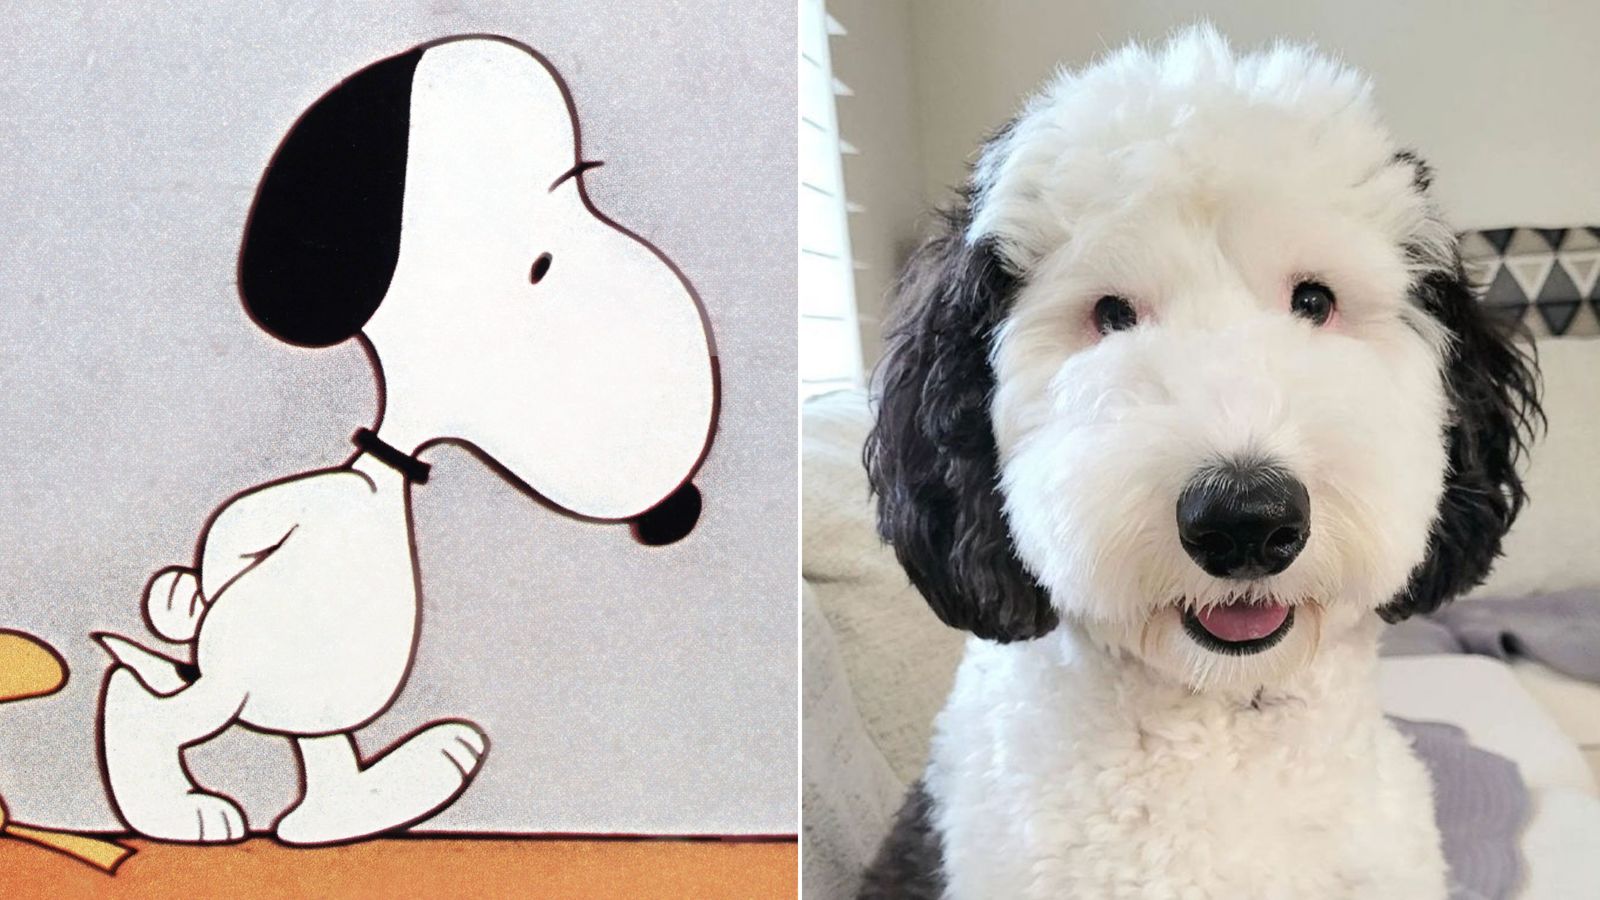 Revealed! The Adorable Mascot You've Been Seeing All Over Instagram